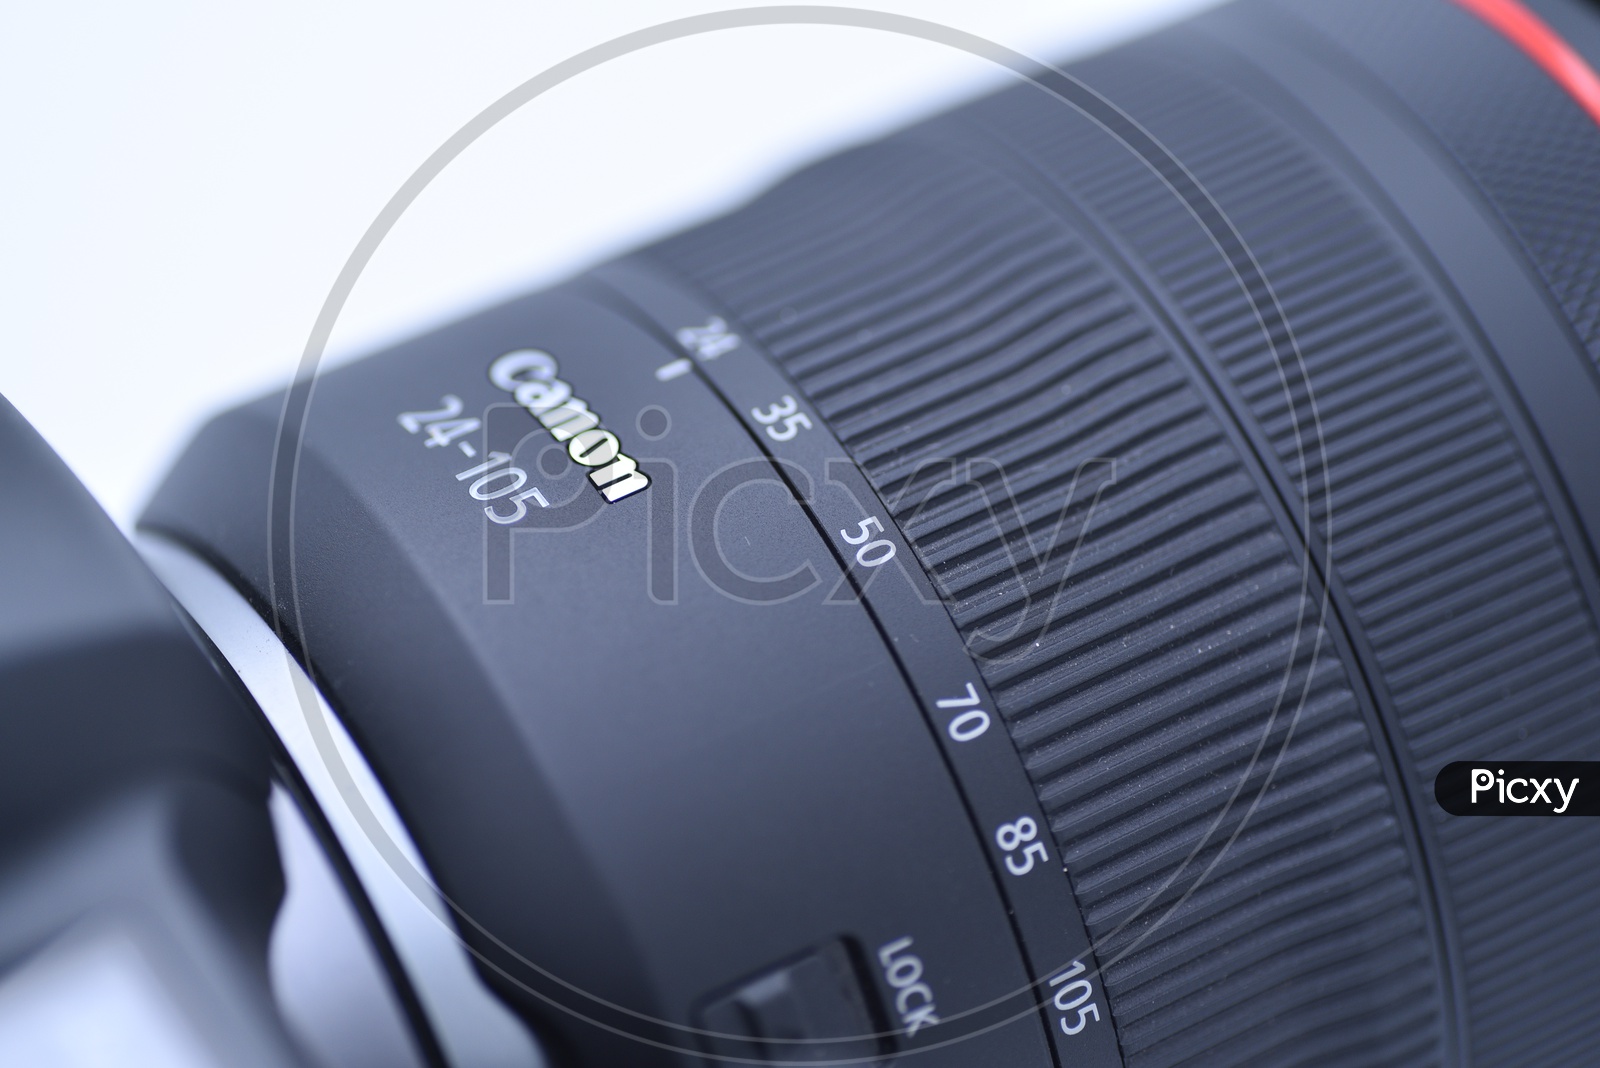 Canon 24 - 105 mm  Lens mounted  to DSLR Camera